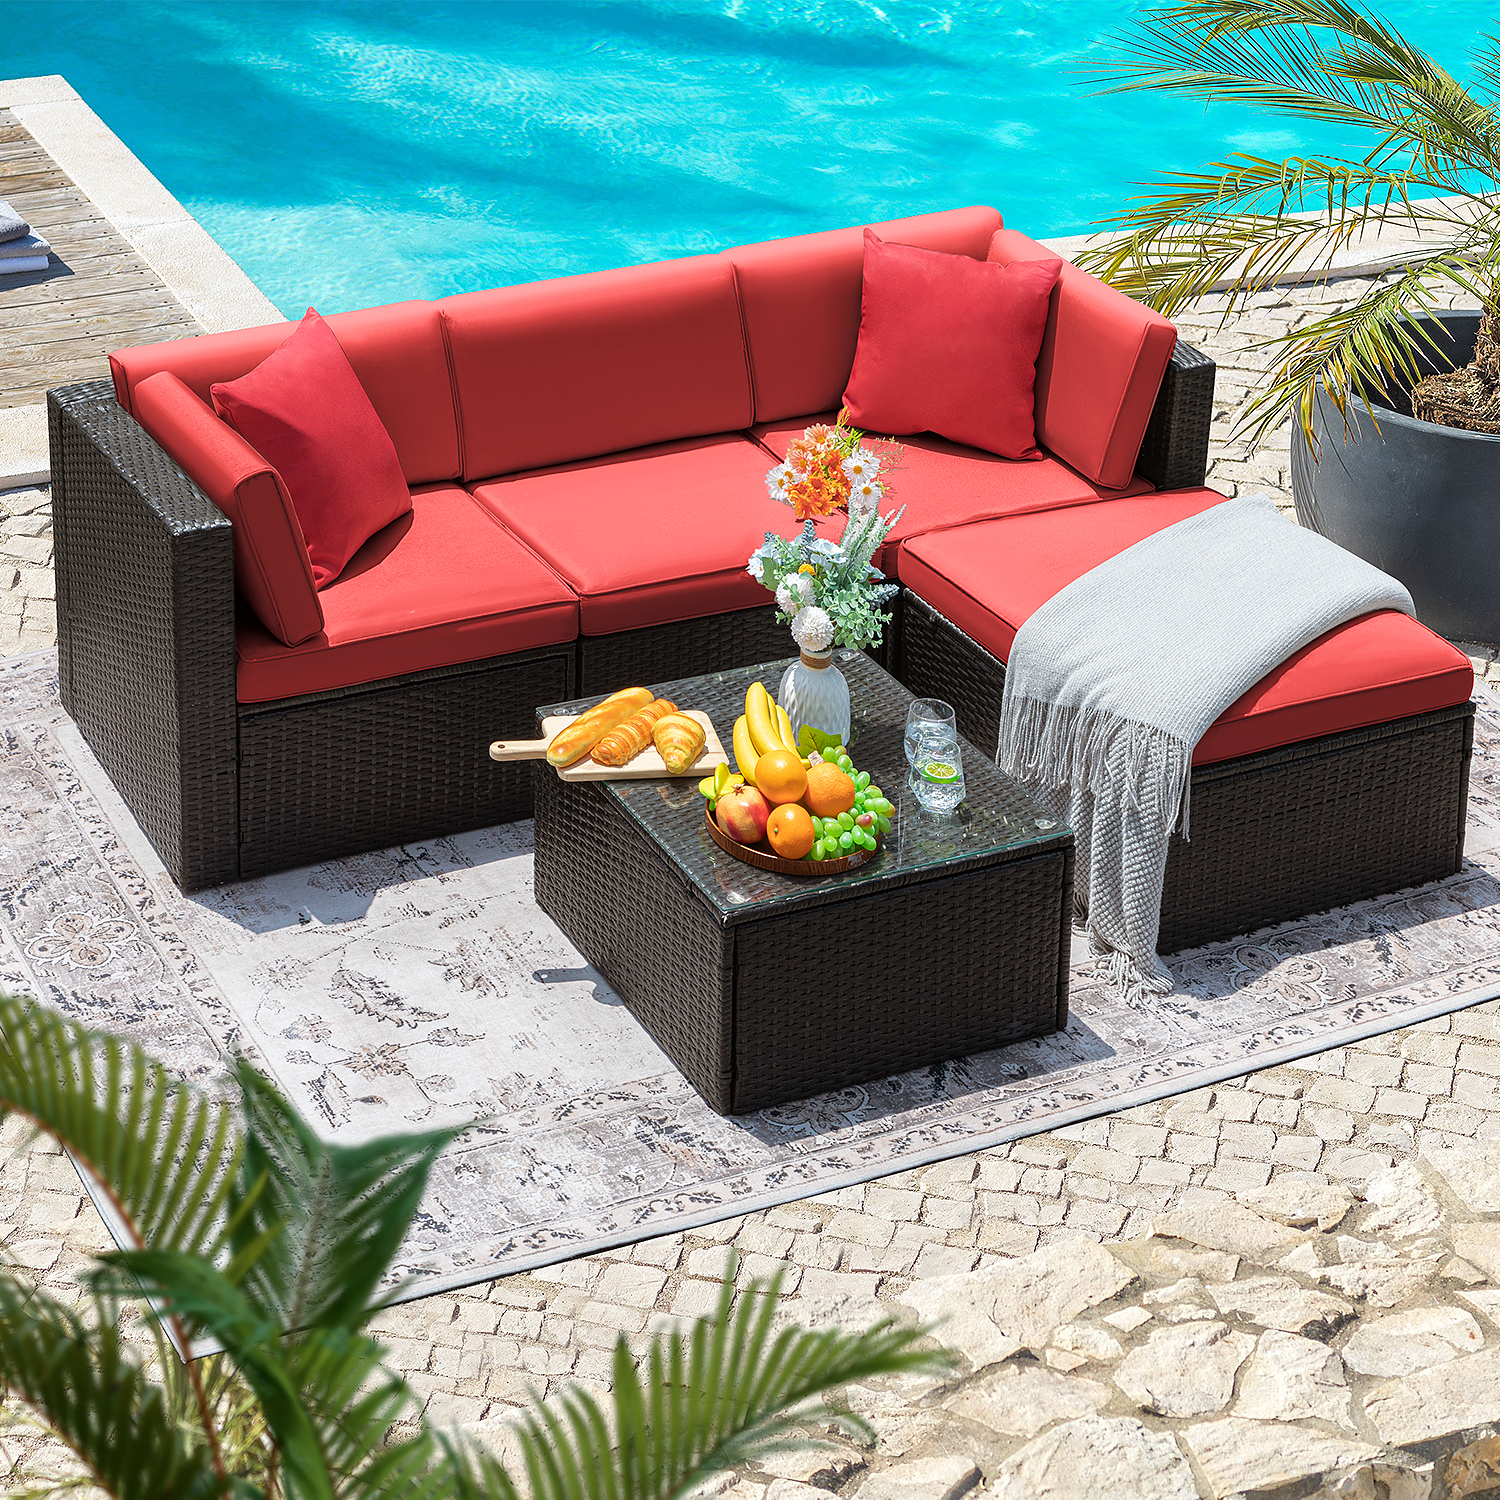 Lacoo 5 Pieces Patio Sectional Sofa Sets All-Weather PE Rattan Conversation Sets With Glass Table, Red - image 1 of 8